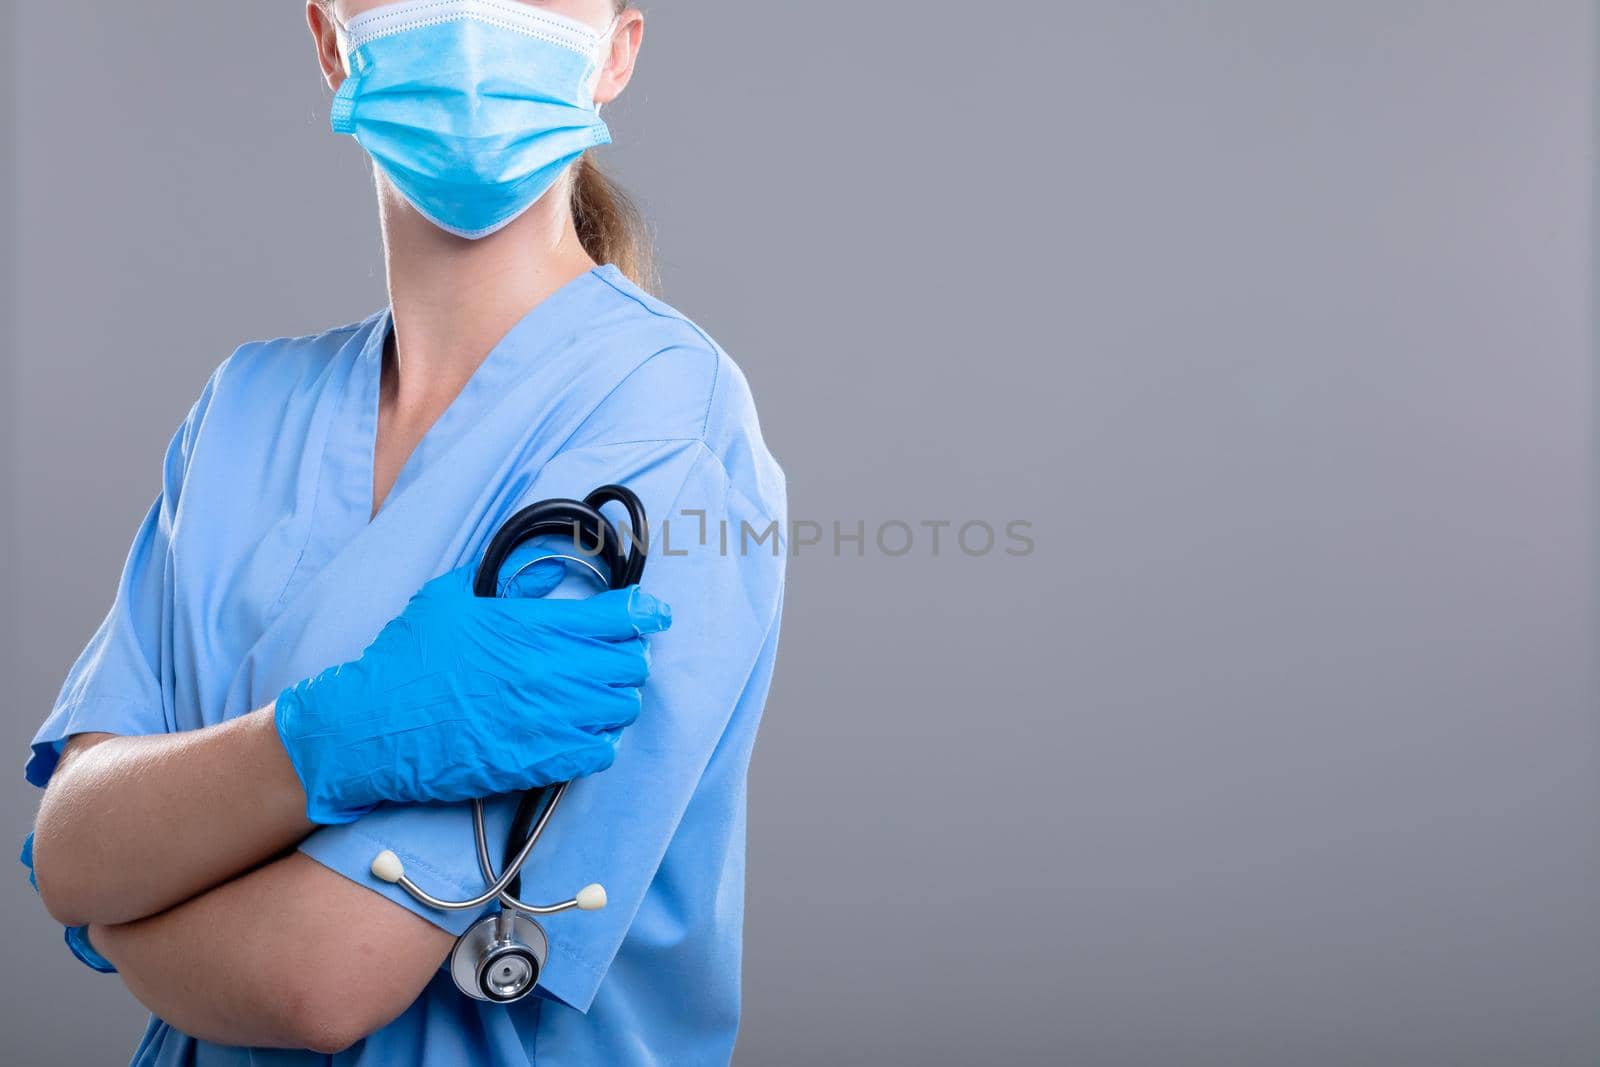 Caucasian female doctor wearing face mask holding stethoscope. medical and healthcare technology concept during covid 19 coronavirus pandemic concept.